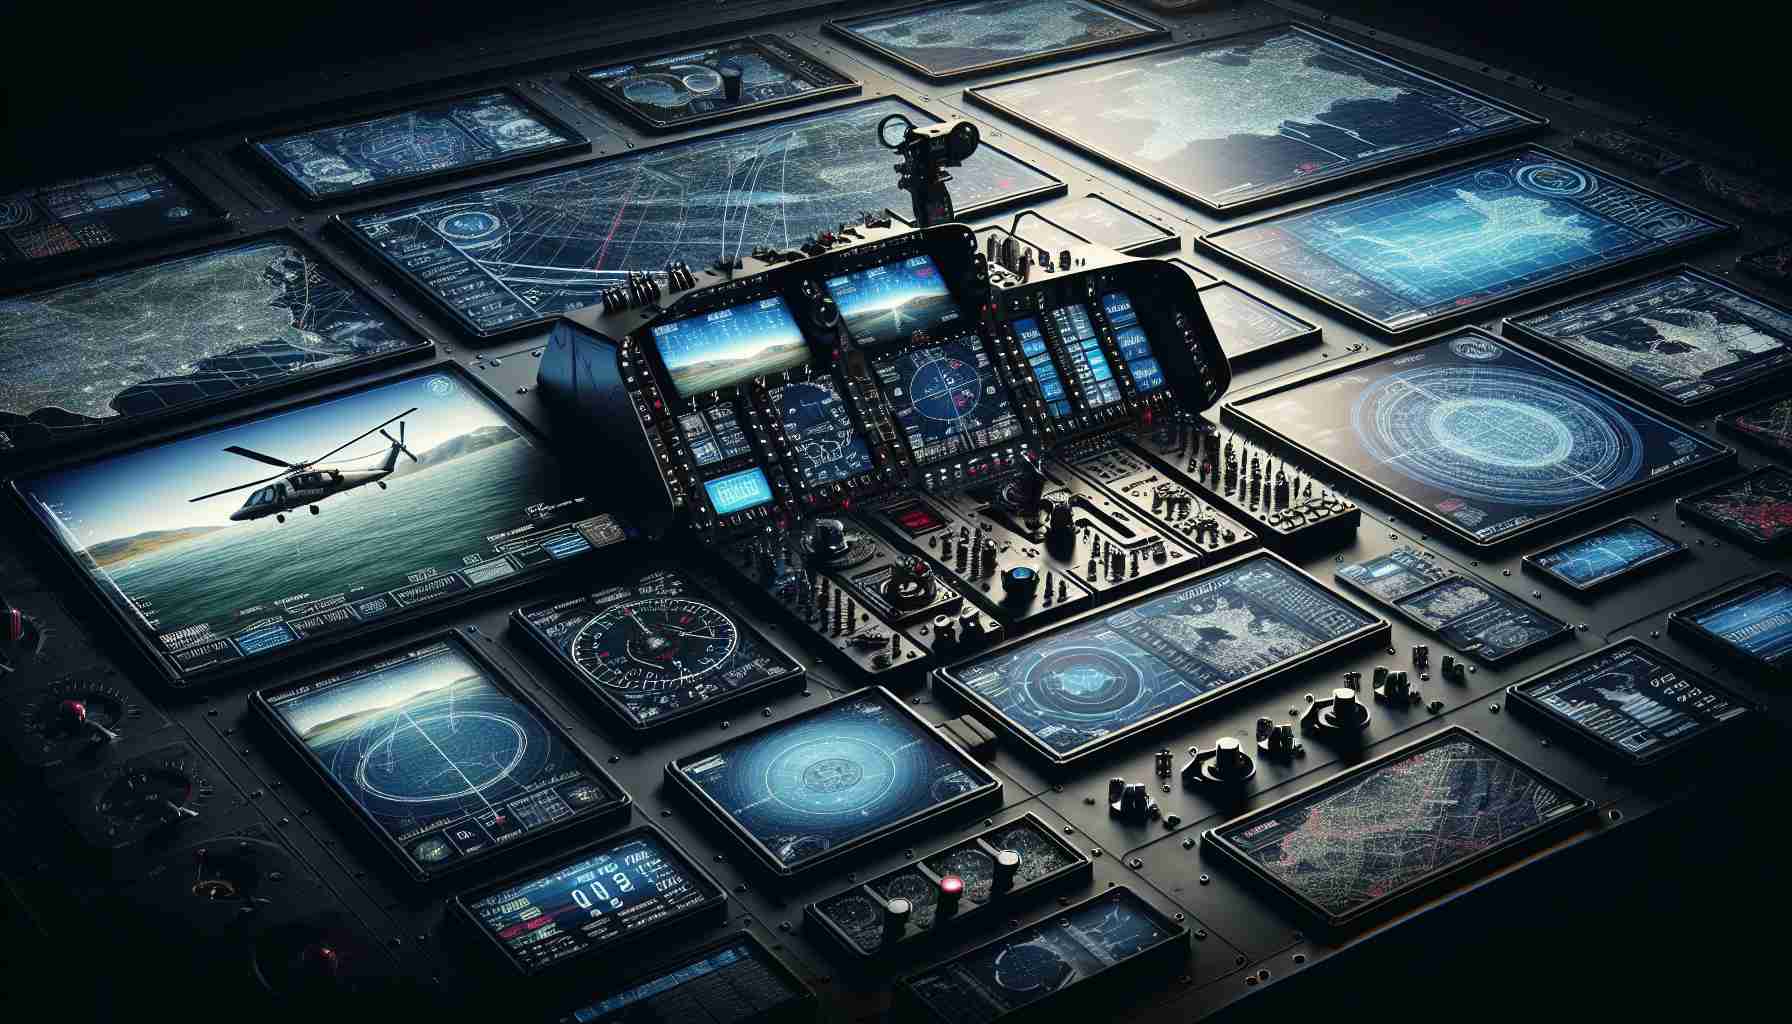 Generate a high-definition, photorealistic image of an advanced, cutting-edge helicopter navigation system. The scene shows a revolutionary upgrade in the form of a hi-tech console with various screens displaying maps, coordinates, and other navigation data. It should represent the next generation of aerial technology, with a futuristic and refined design.